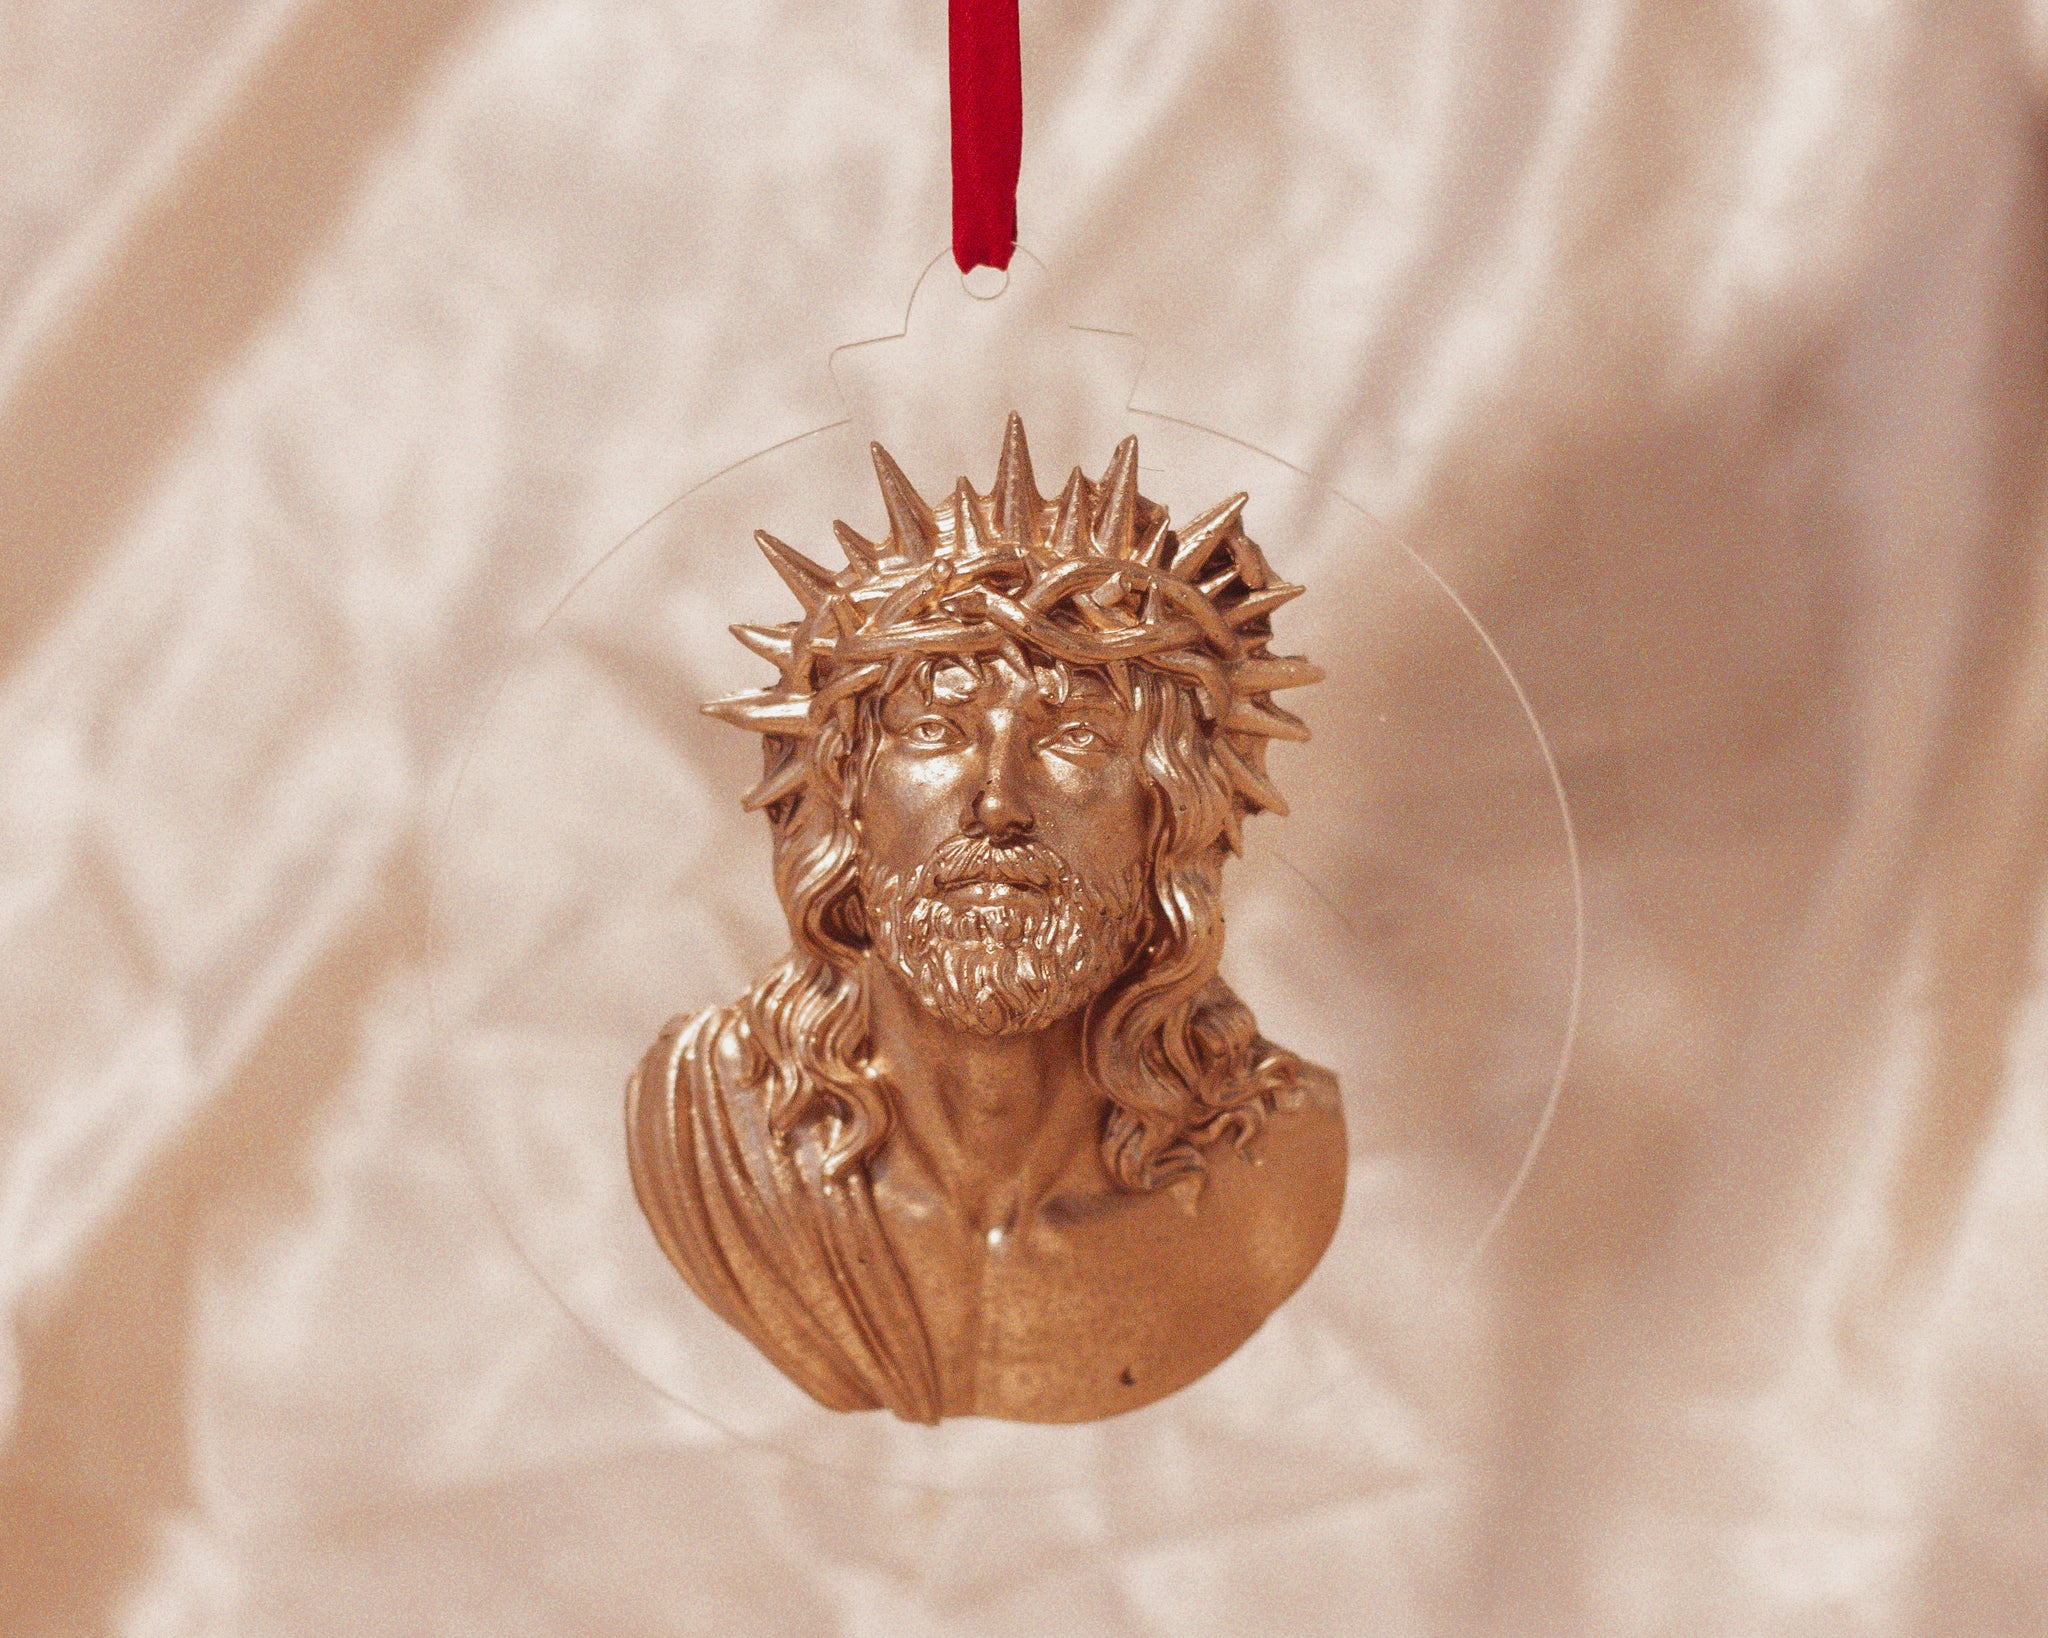 Handcrafted Catholic Ornaments